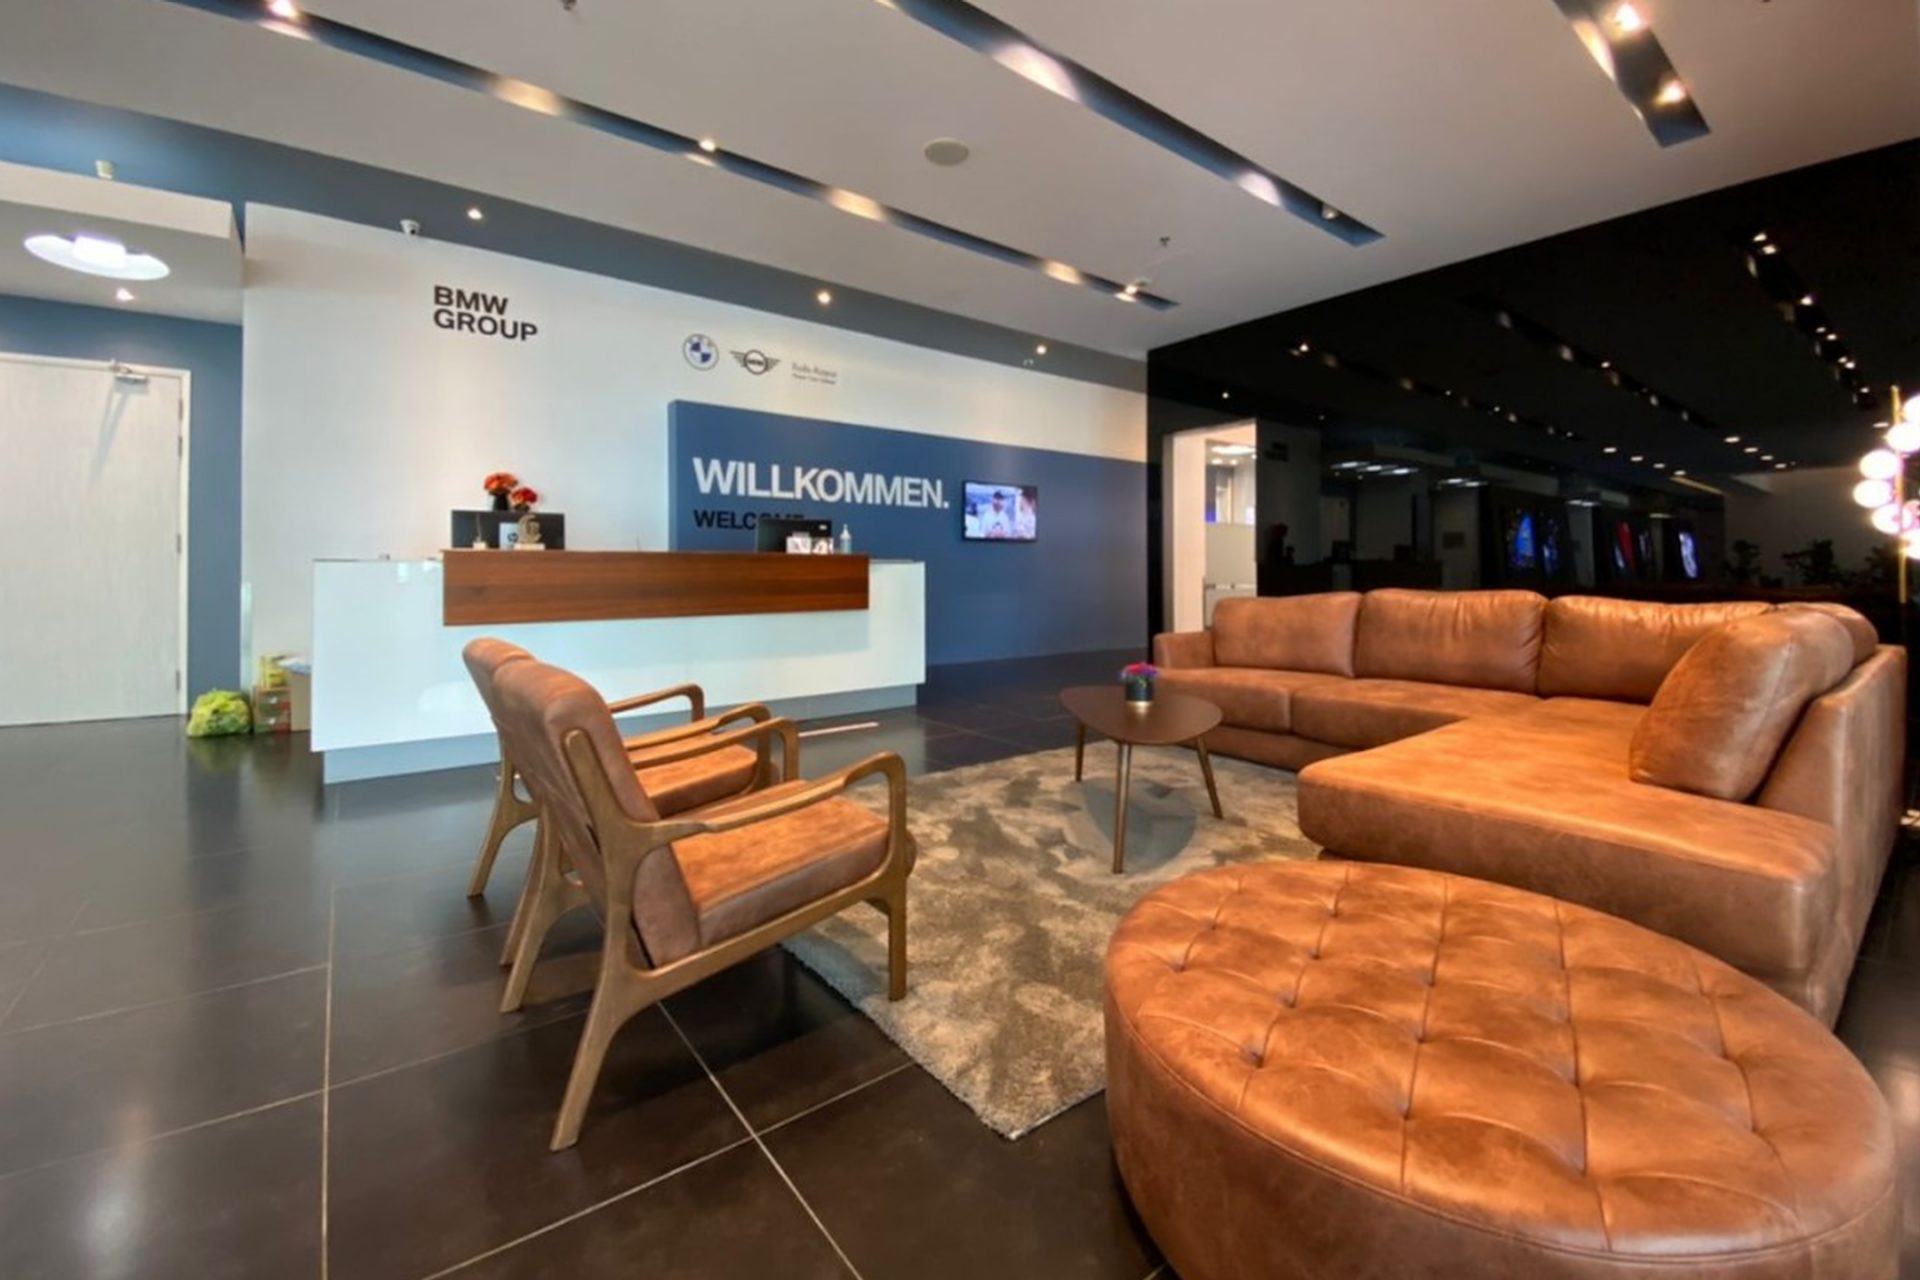 The image shows the entry to the BMW Group Malaysia office.